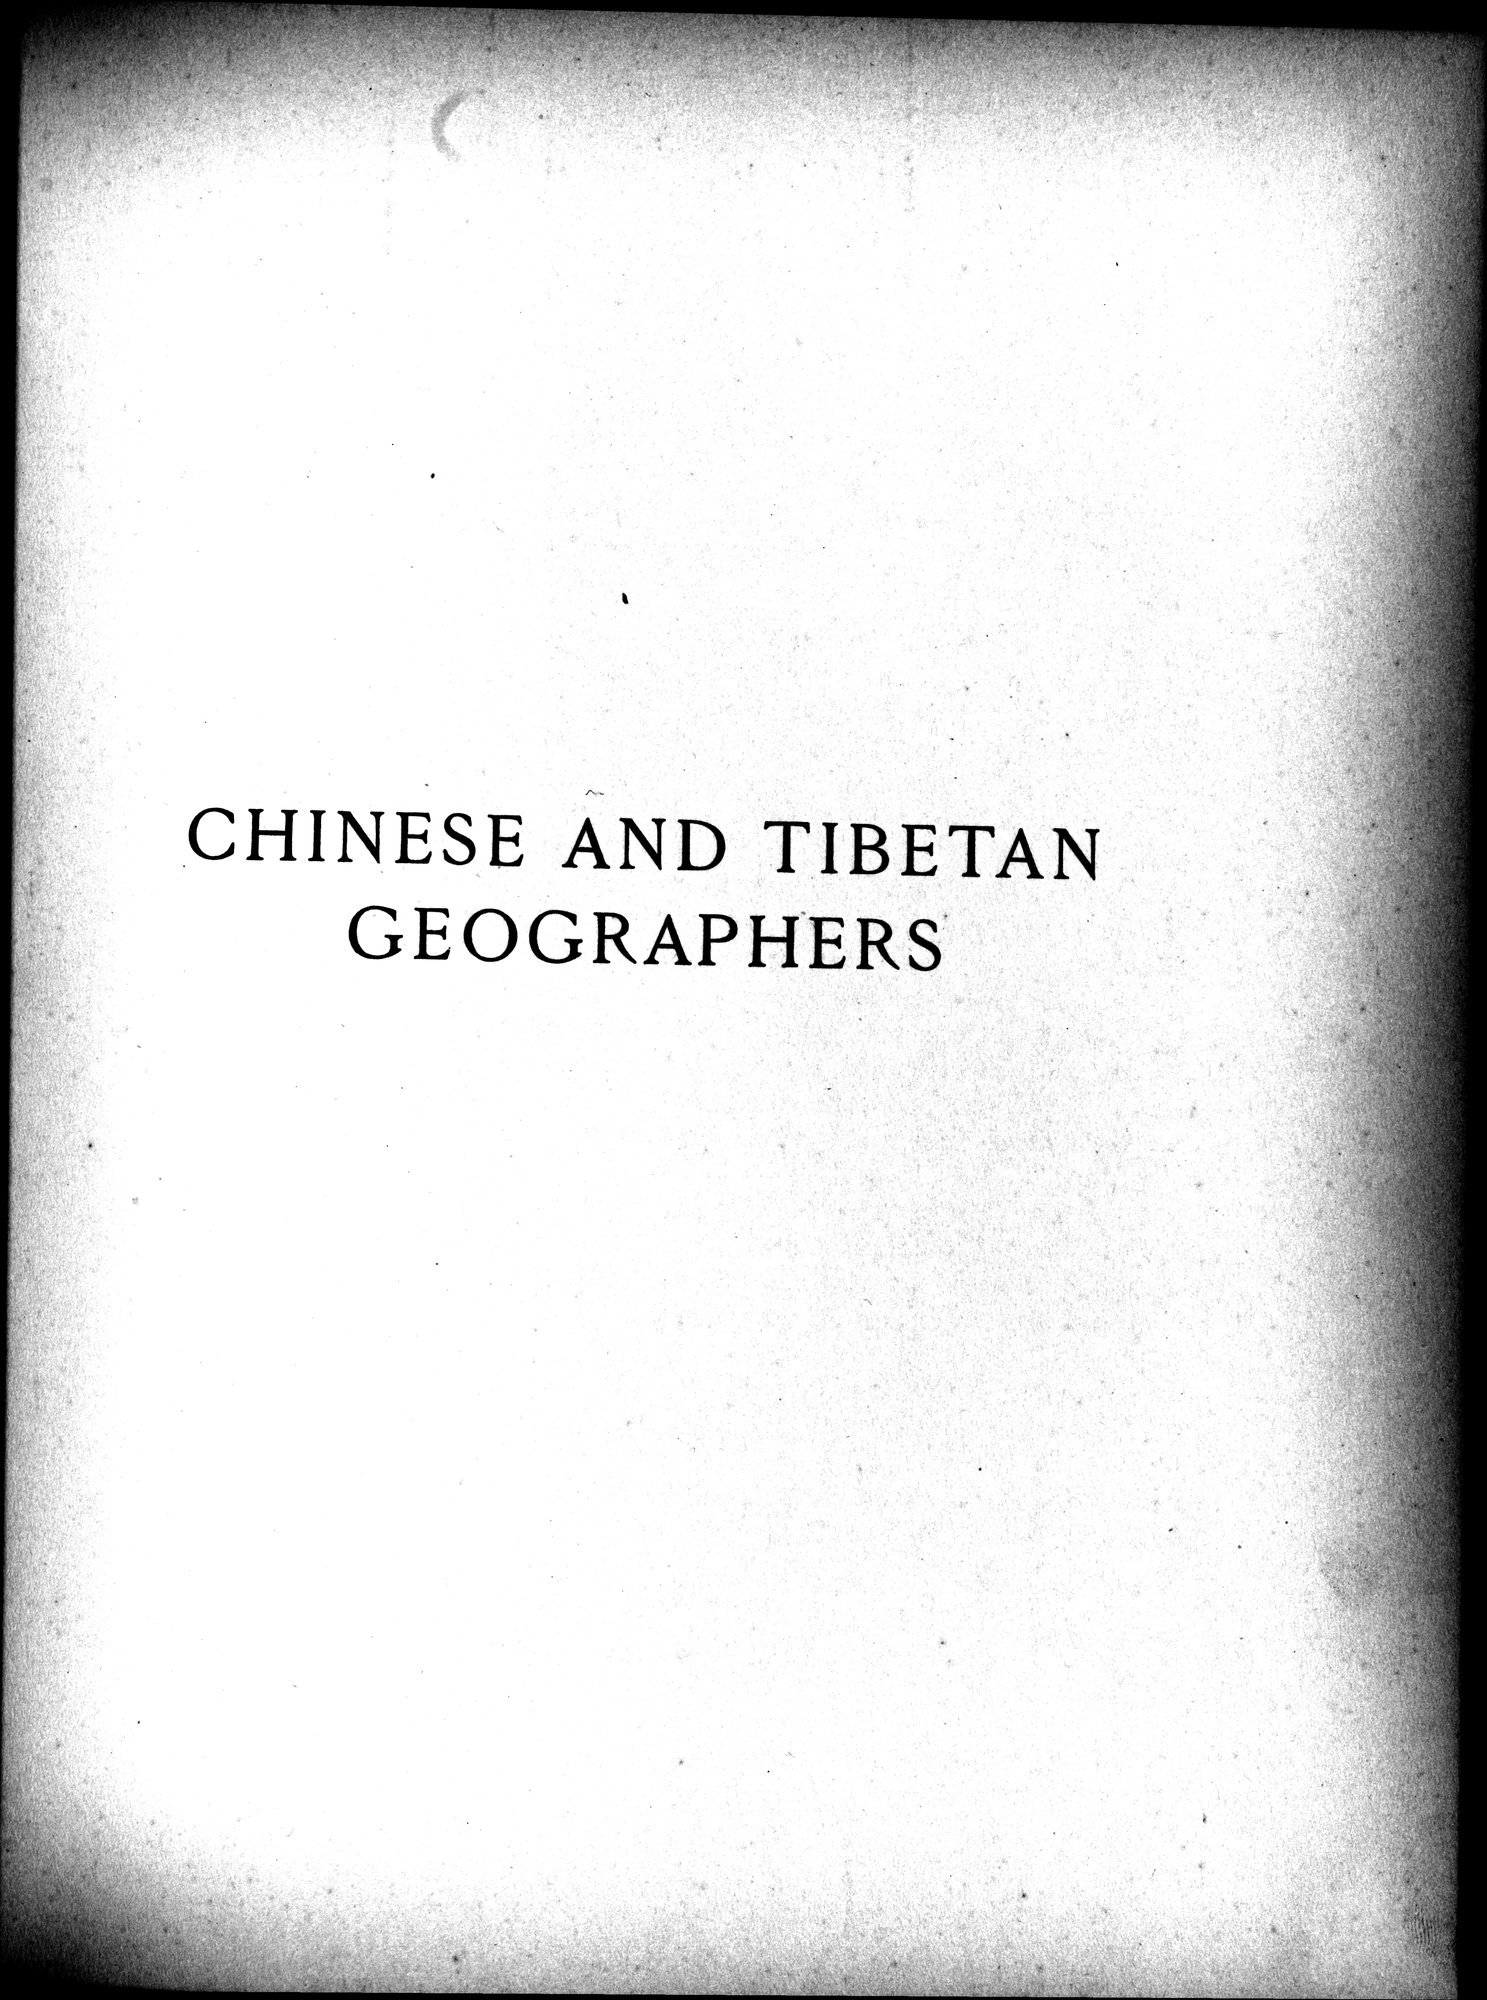 Southern Tibet : vol.1 / Page 127 (Grayscale High Resolution Image)